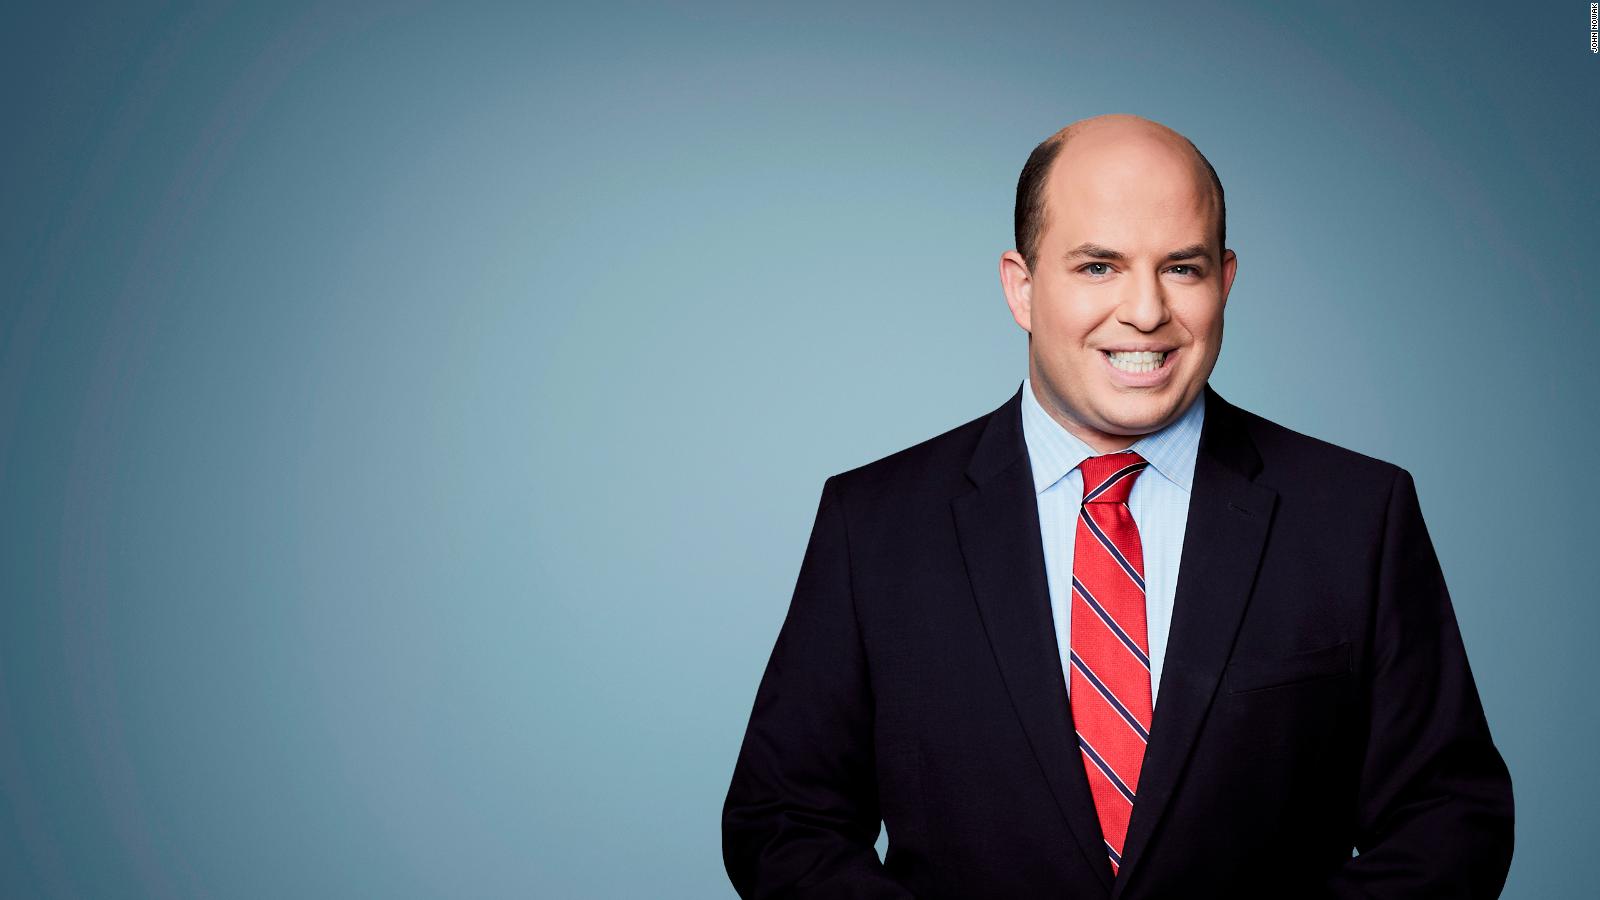 Ex-CNN anchor Brian Stelter resurfaces in Davos to host panel